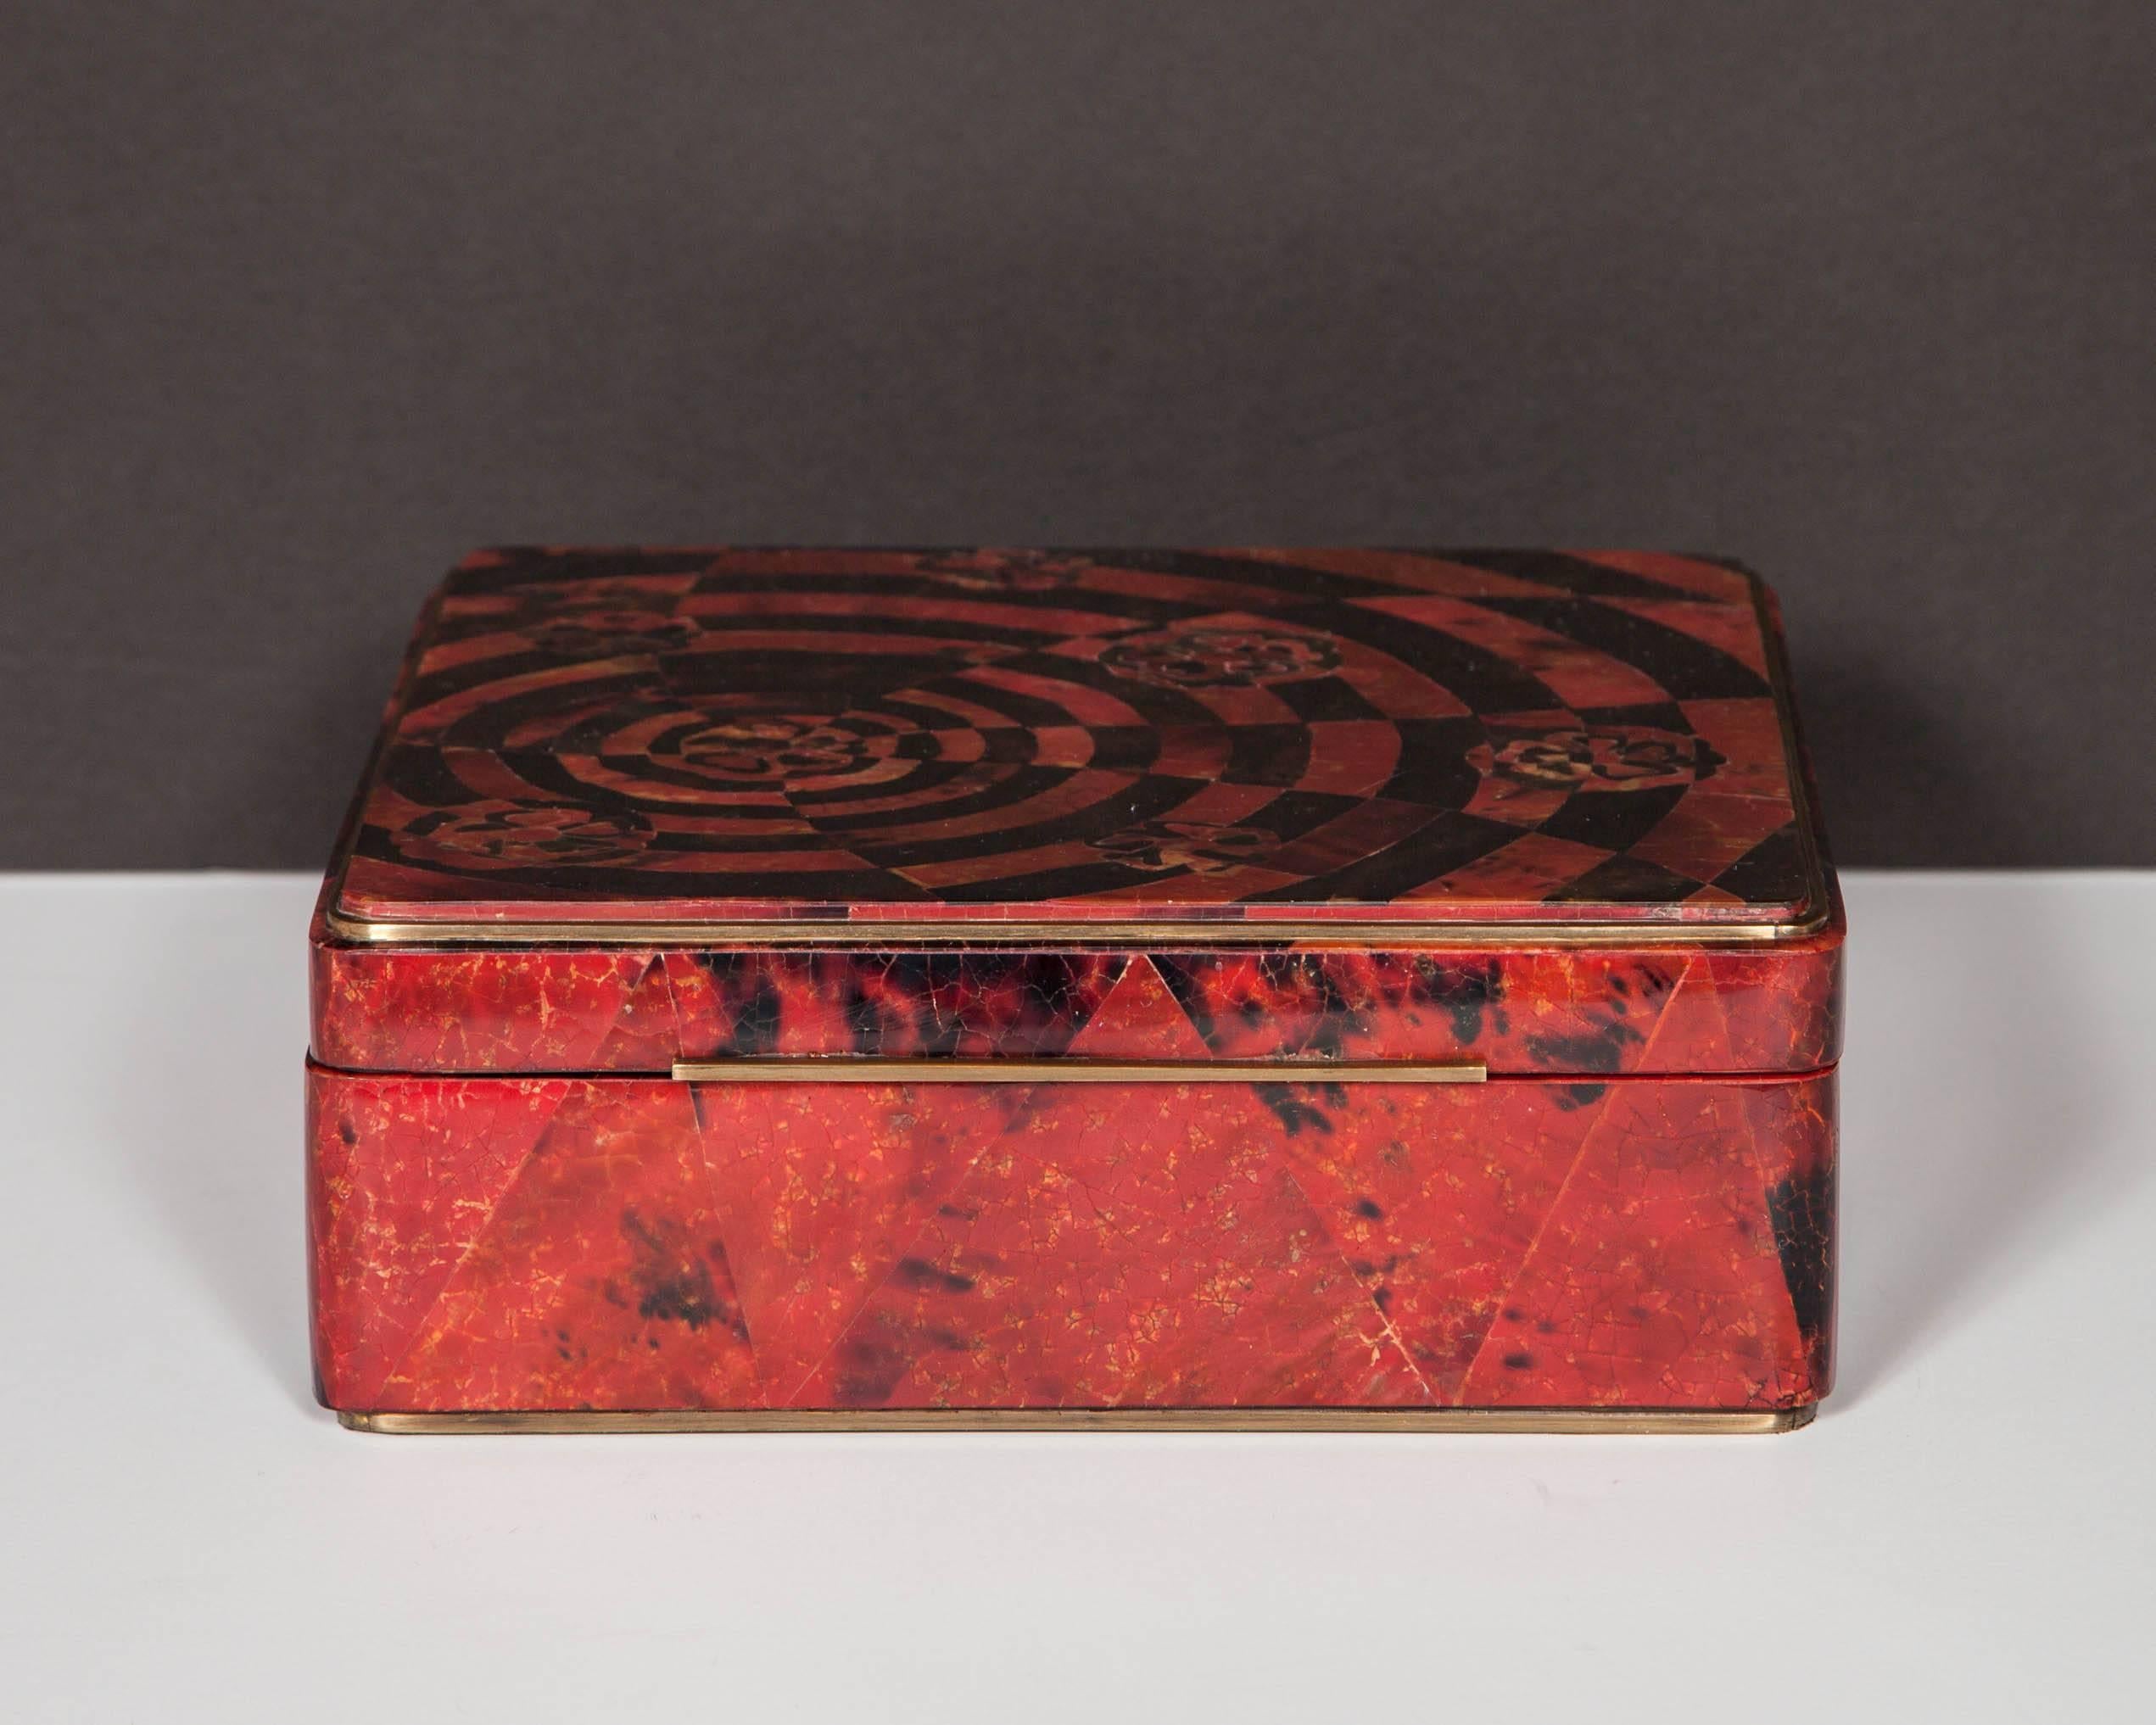 Outstanding large square decorative box comprised of exotic lacquered pen shell. Dyed in hues of ruby red and black, the box features a series of mosaic patterns and a geometric inlay top. All handcrafted and fitted with bronze hardware and hinges.